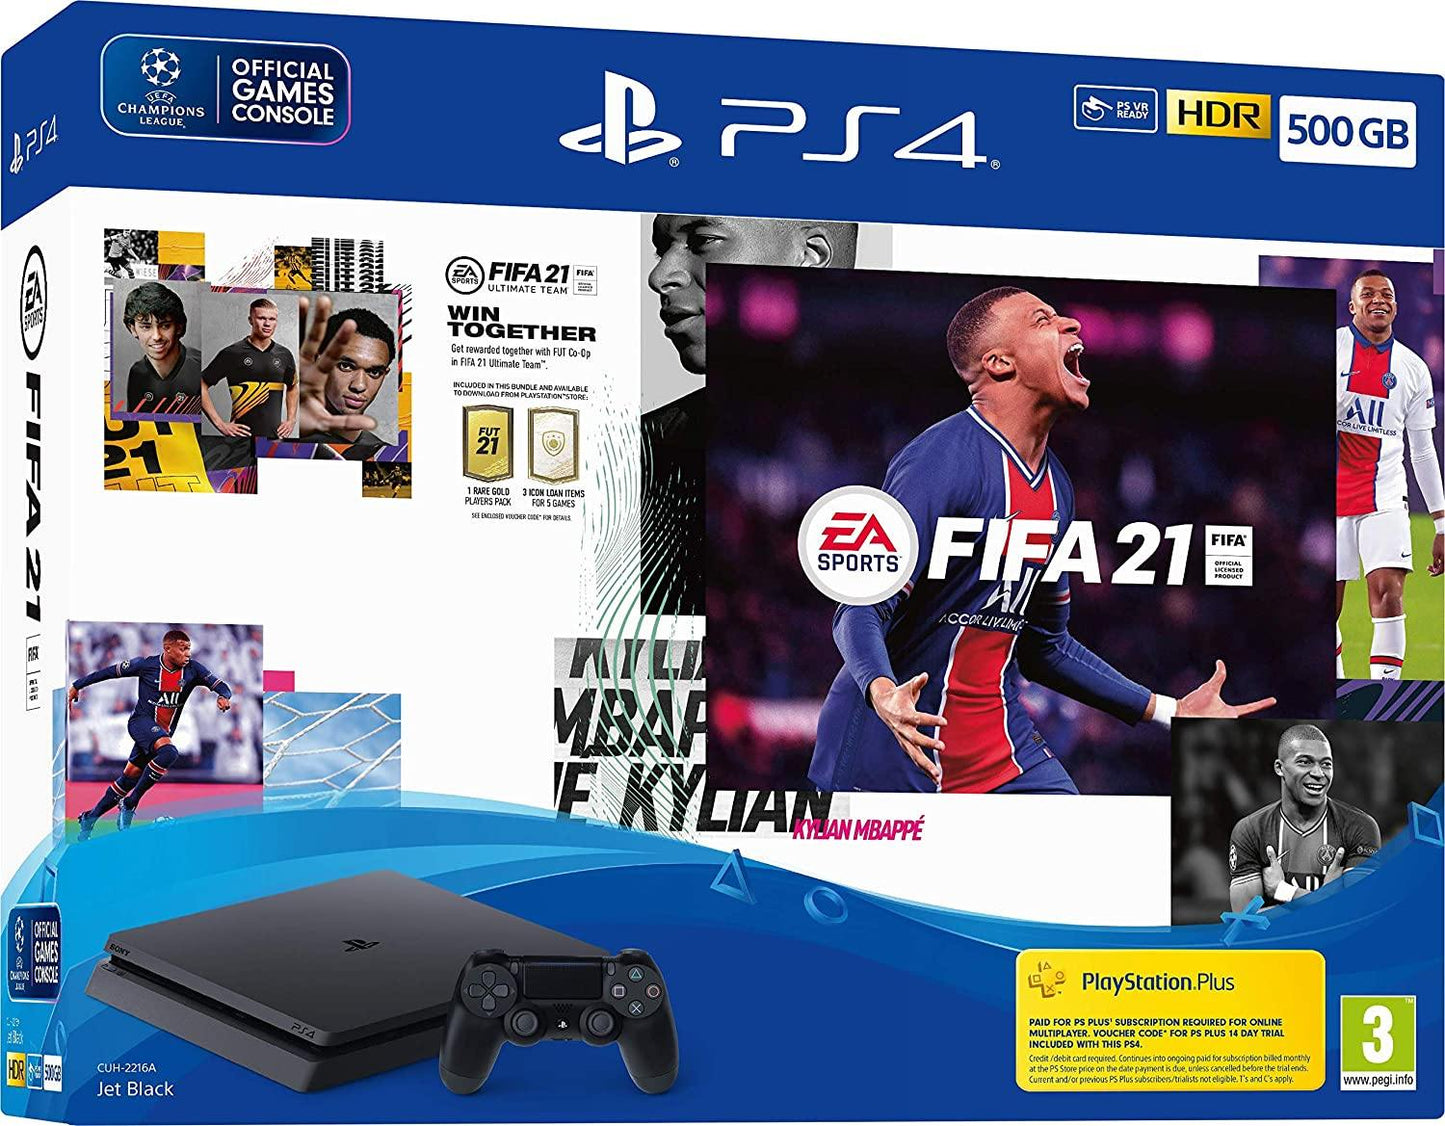 PS4 500GB FIFA 21 Bundle (PS4) - Offer Games